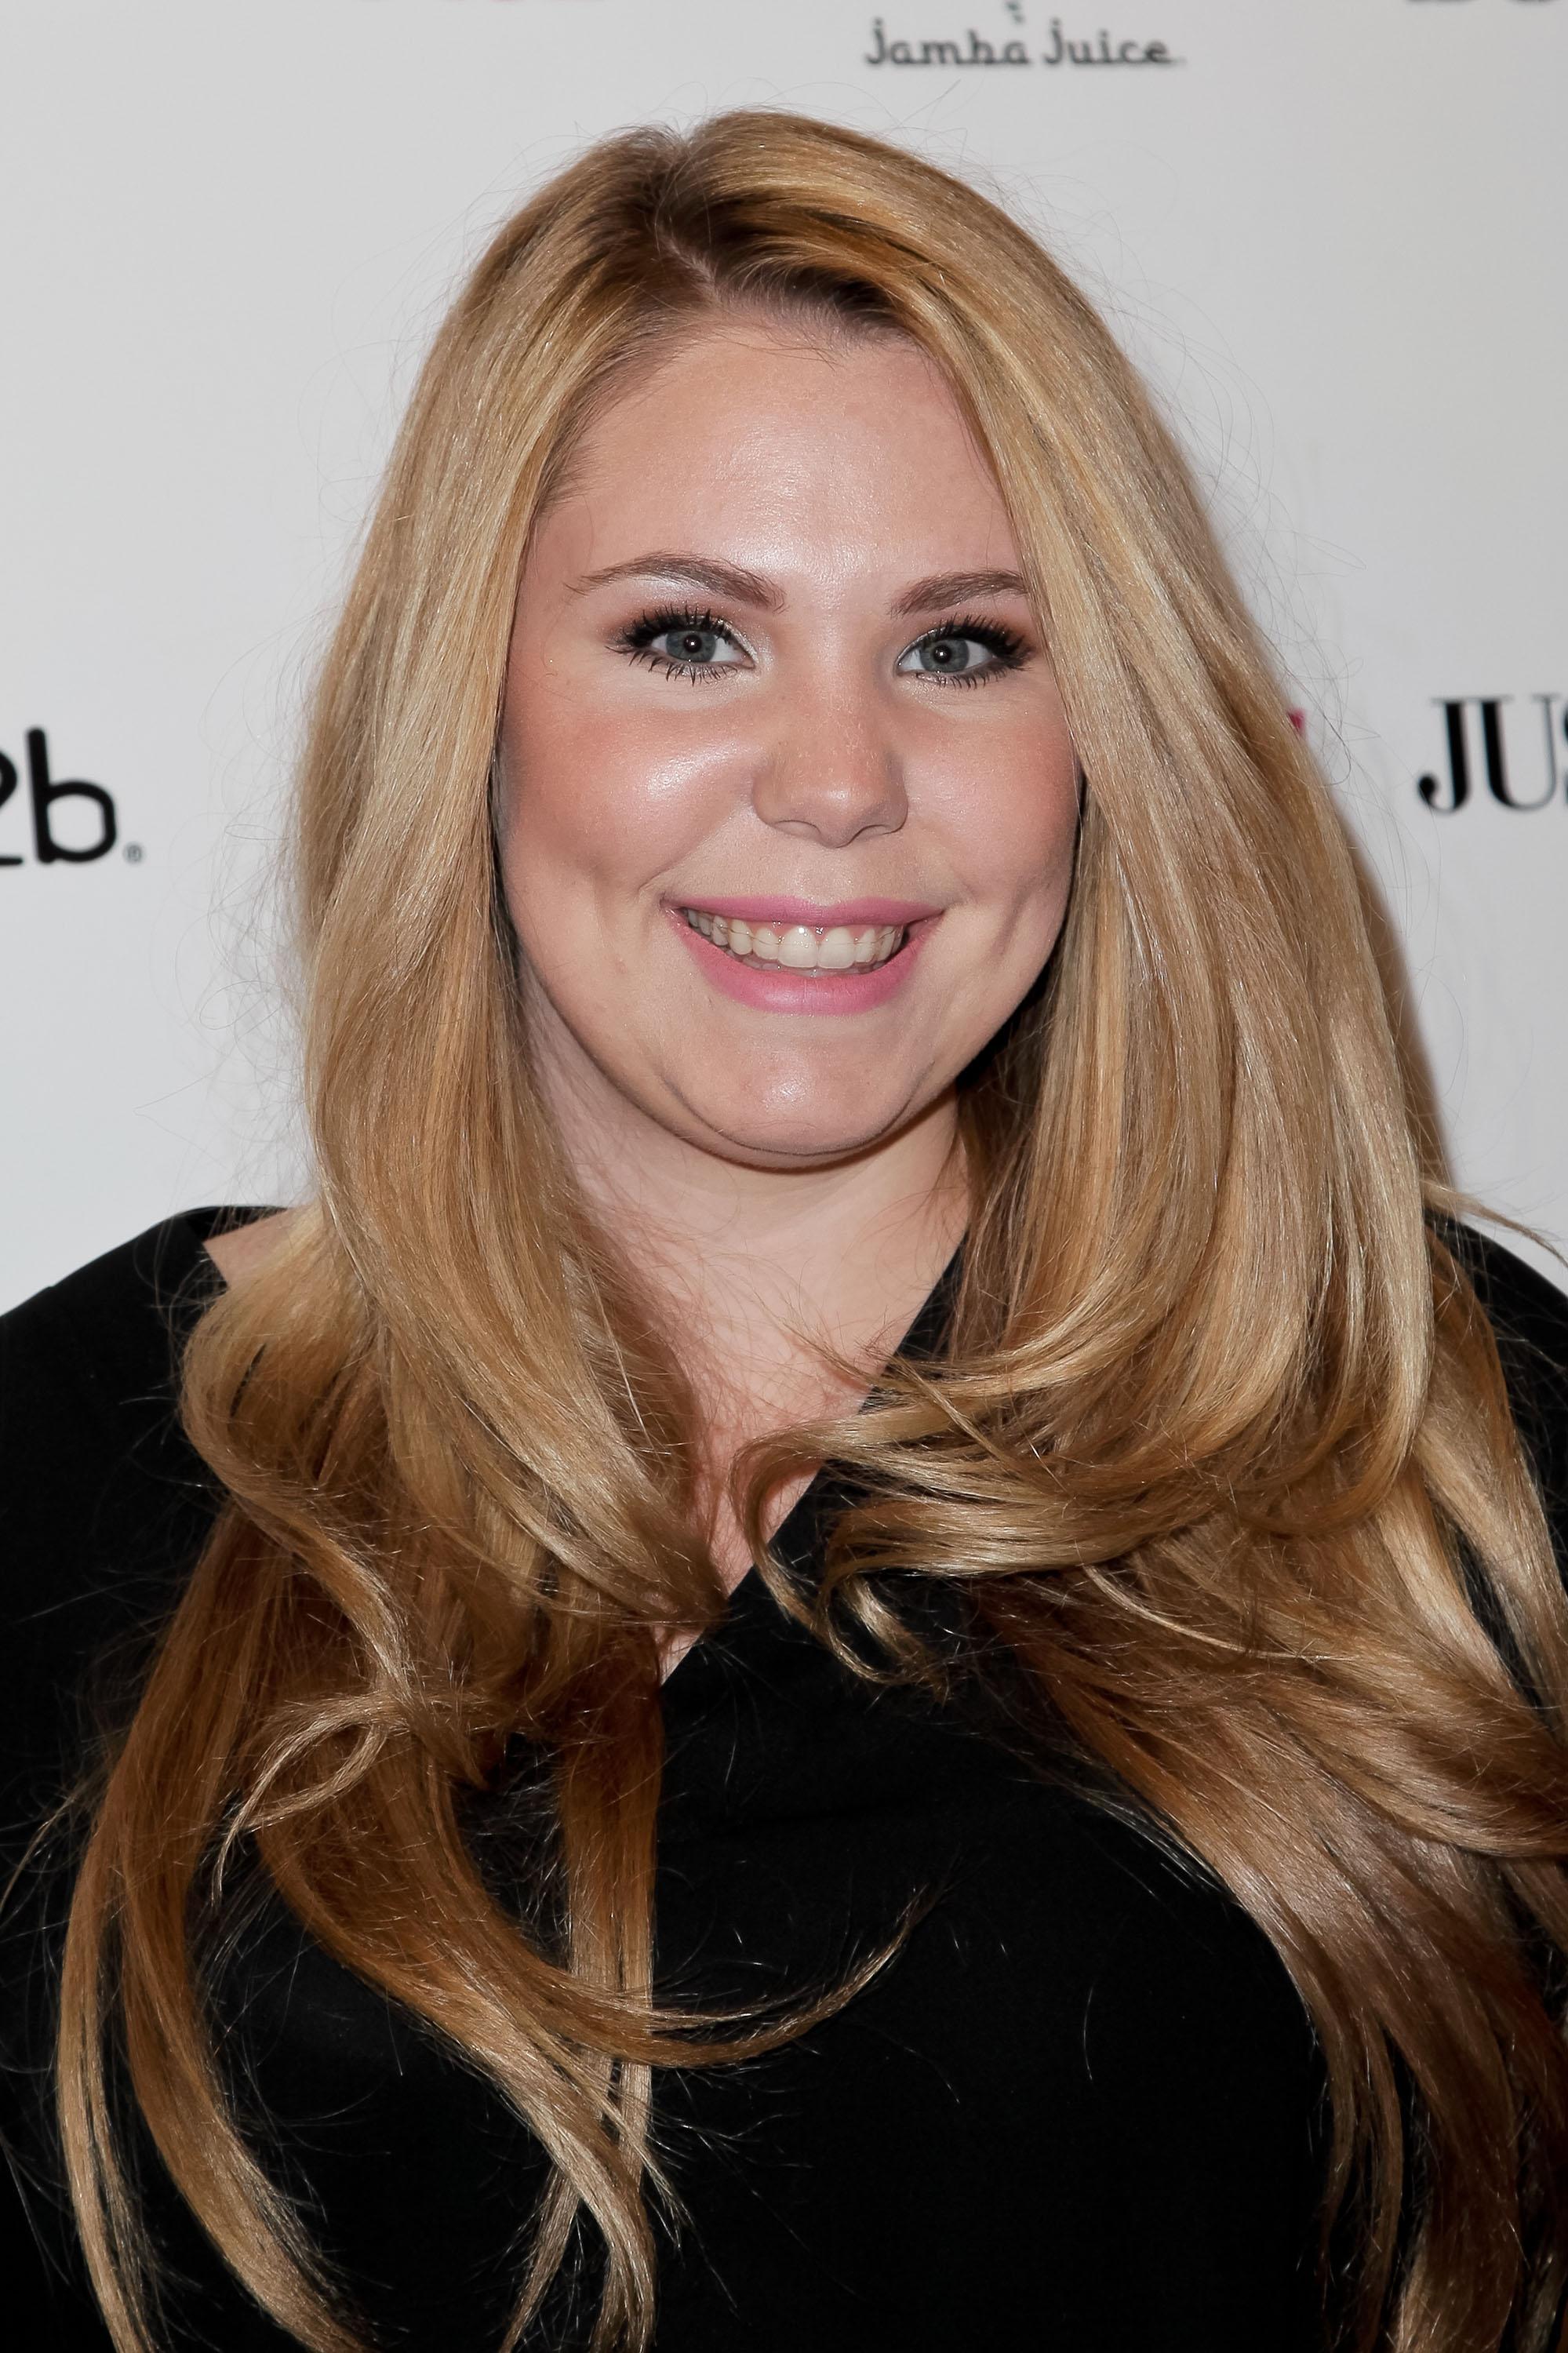 Kailyn Lowry’s Nude Maternity Shoot Causes Controversy